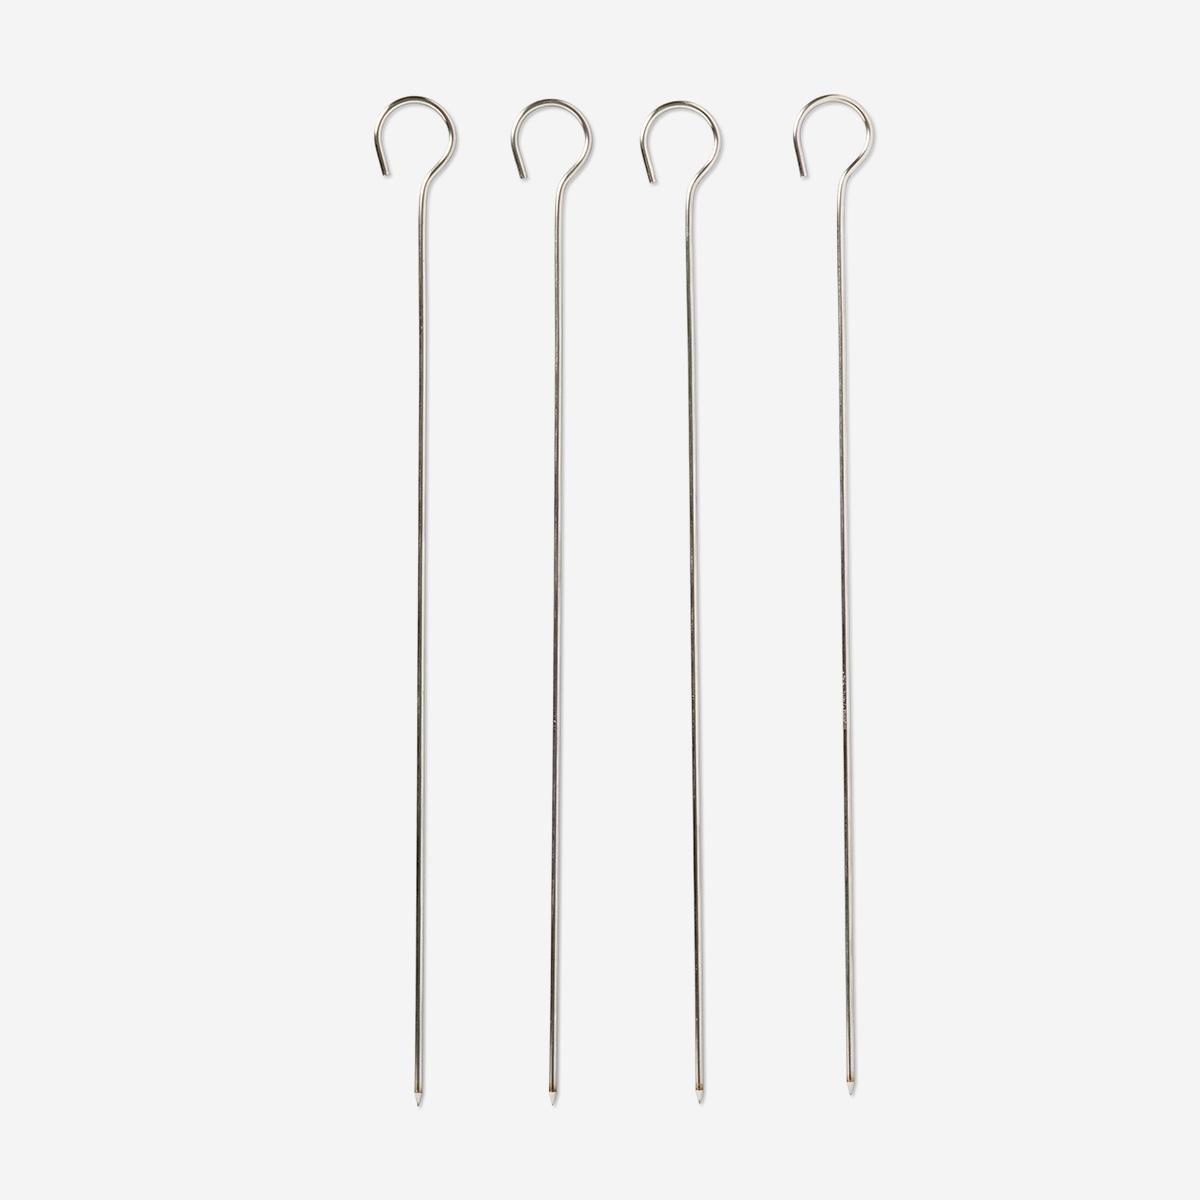 Silver skewers for grilling. 4 pcs